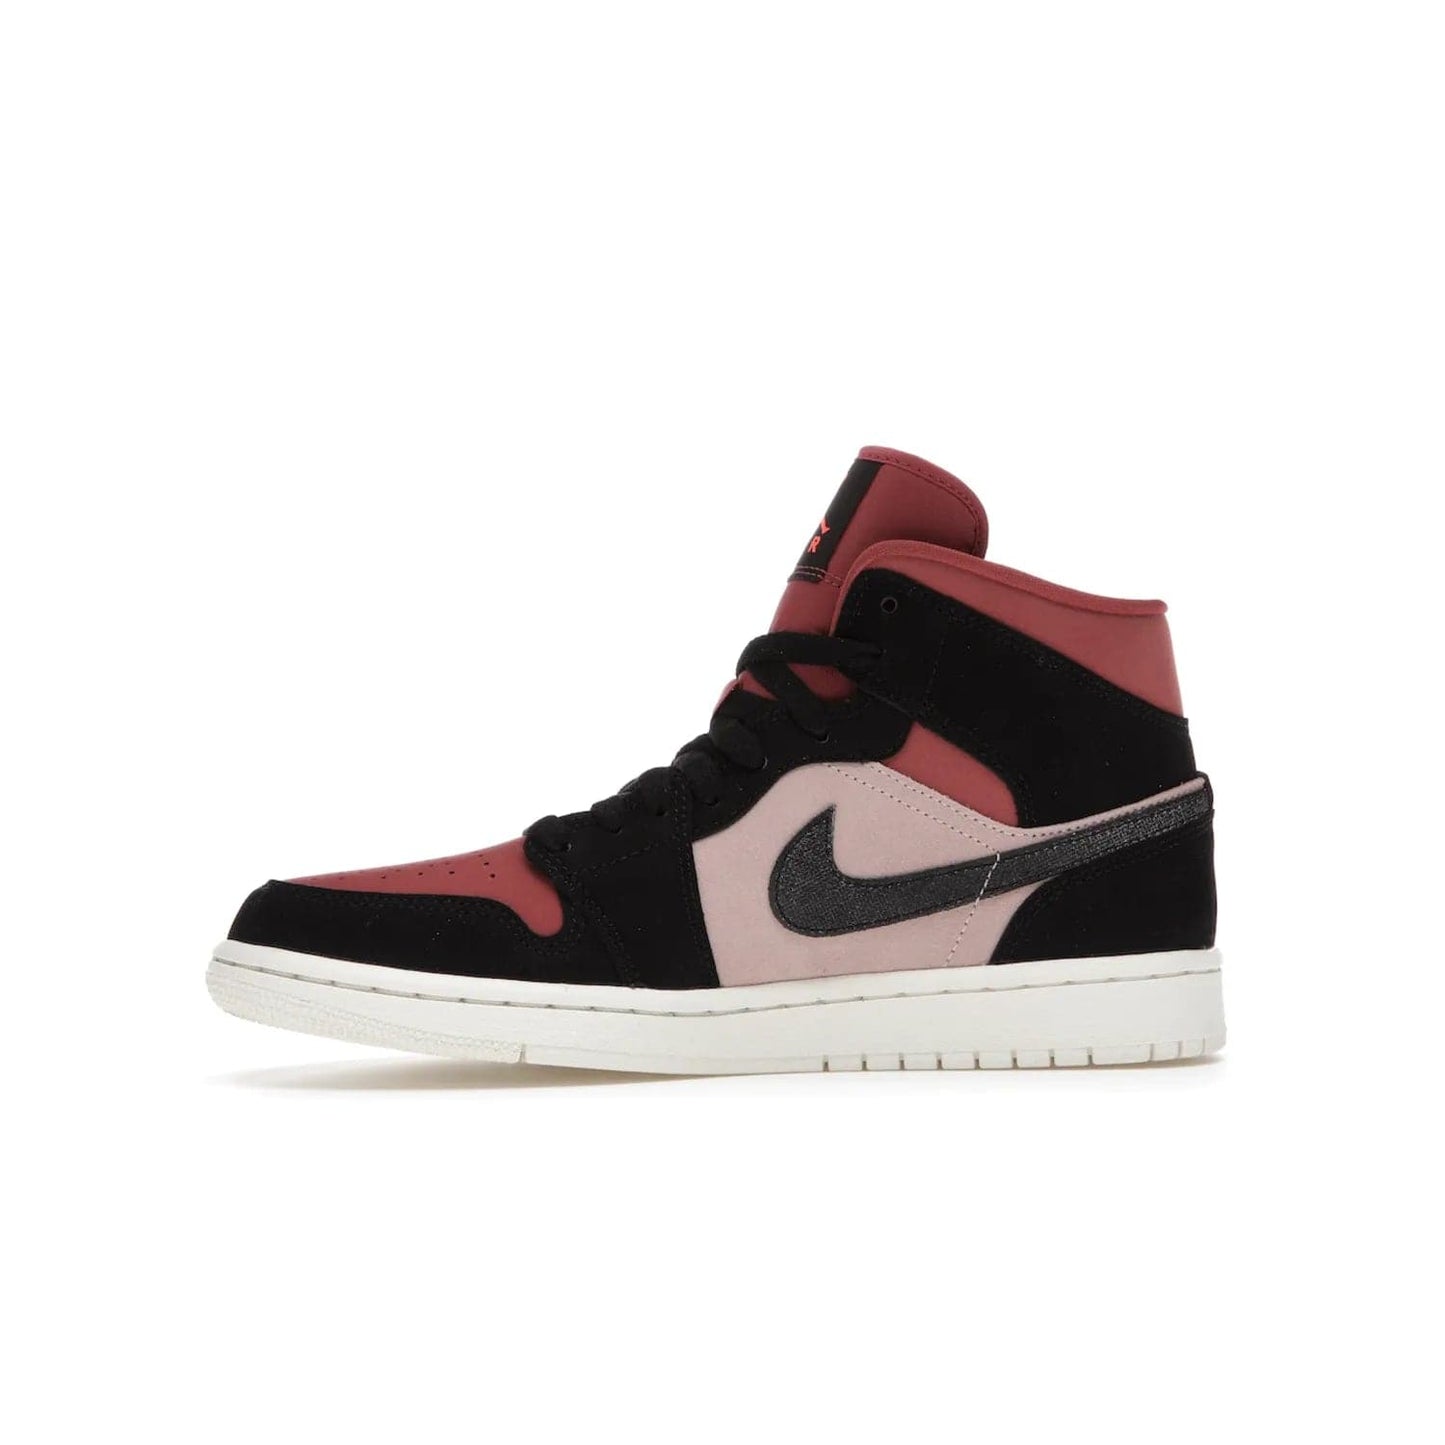 Jordan 1 Mid Canyon Rust (Women's) - Image 18 - Only at www.BallersClubKickz.com - The Air Jordan 1 Mid Canyon Rust for Women (W) is a stylish mid-top sneaker with distressed Nike swooshes and a white rubber cupsole. Featuring a blend of particle beige, canyon rust, sail and black, this versatile design will provide you with amazing comfort and style. Out now, 1st March 2021!